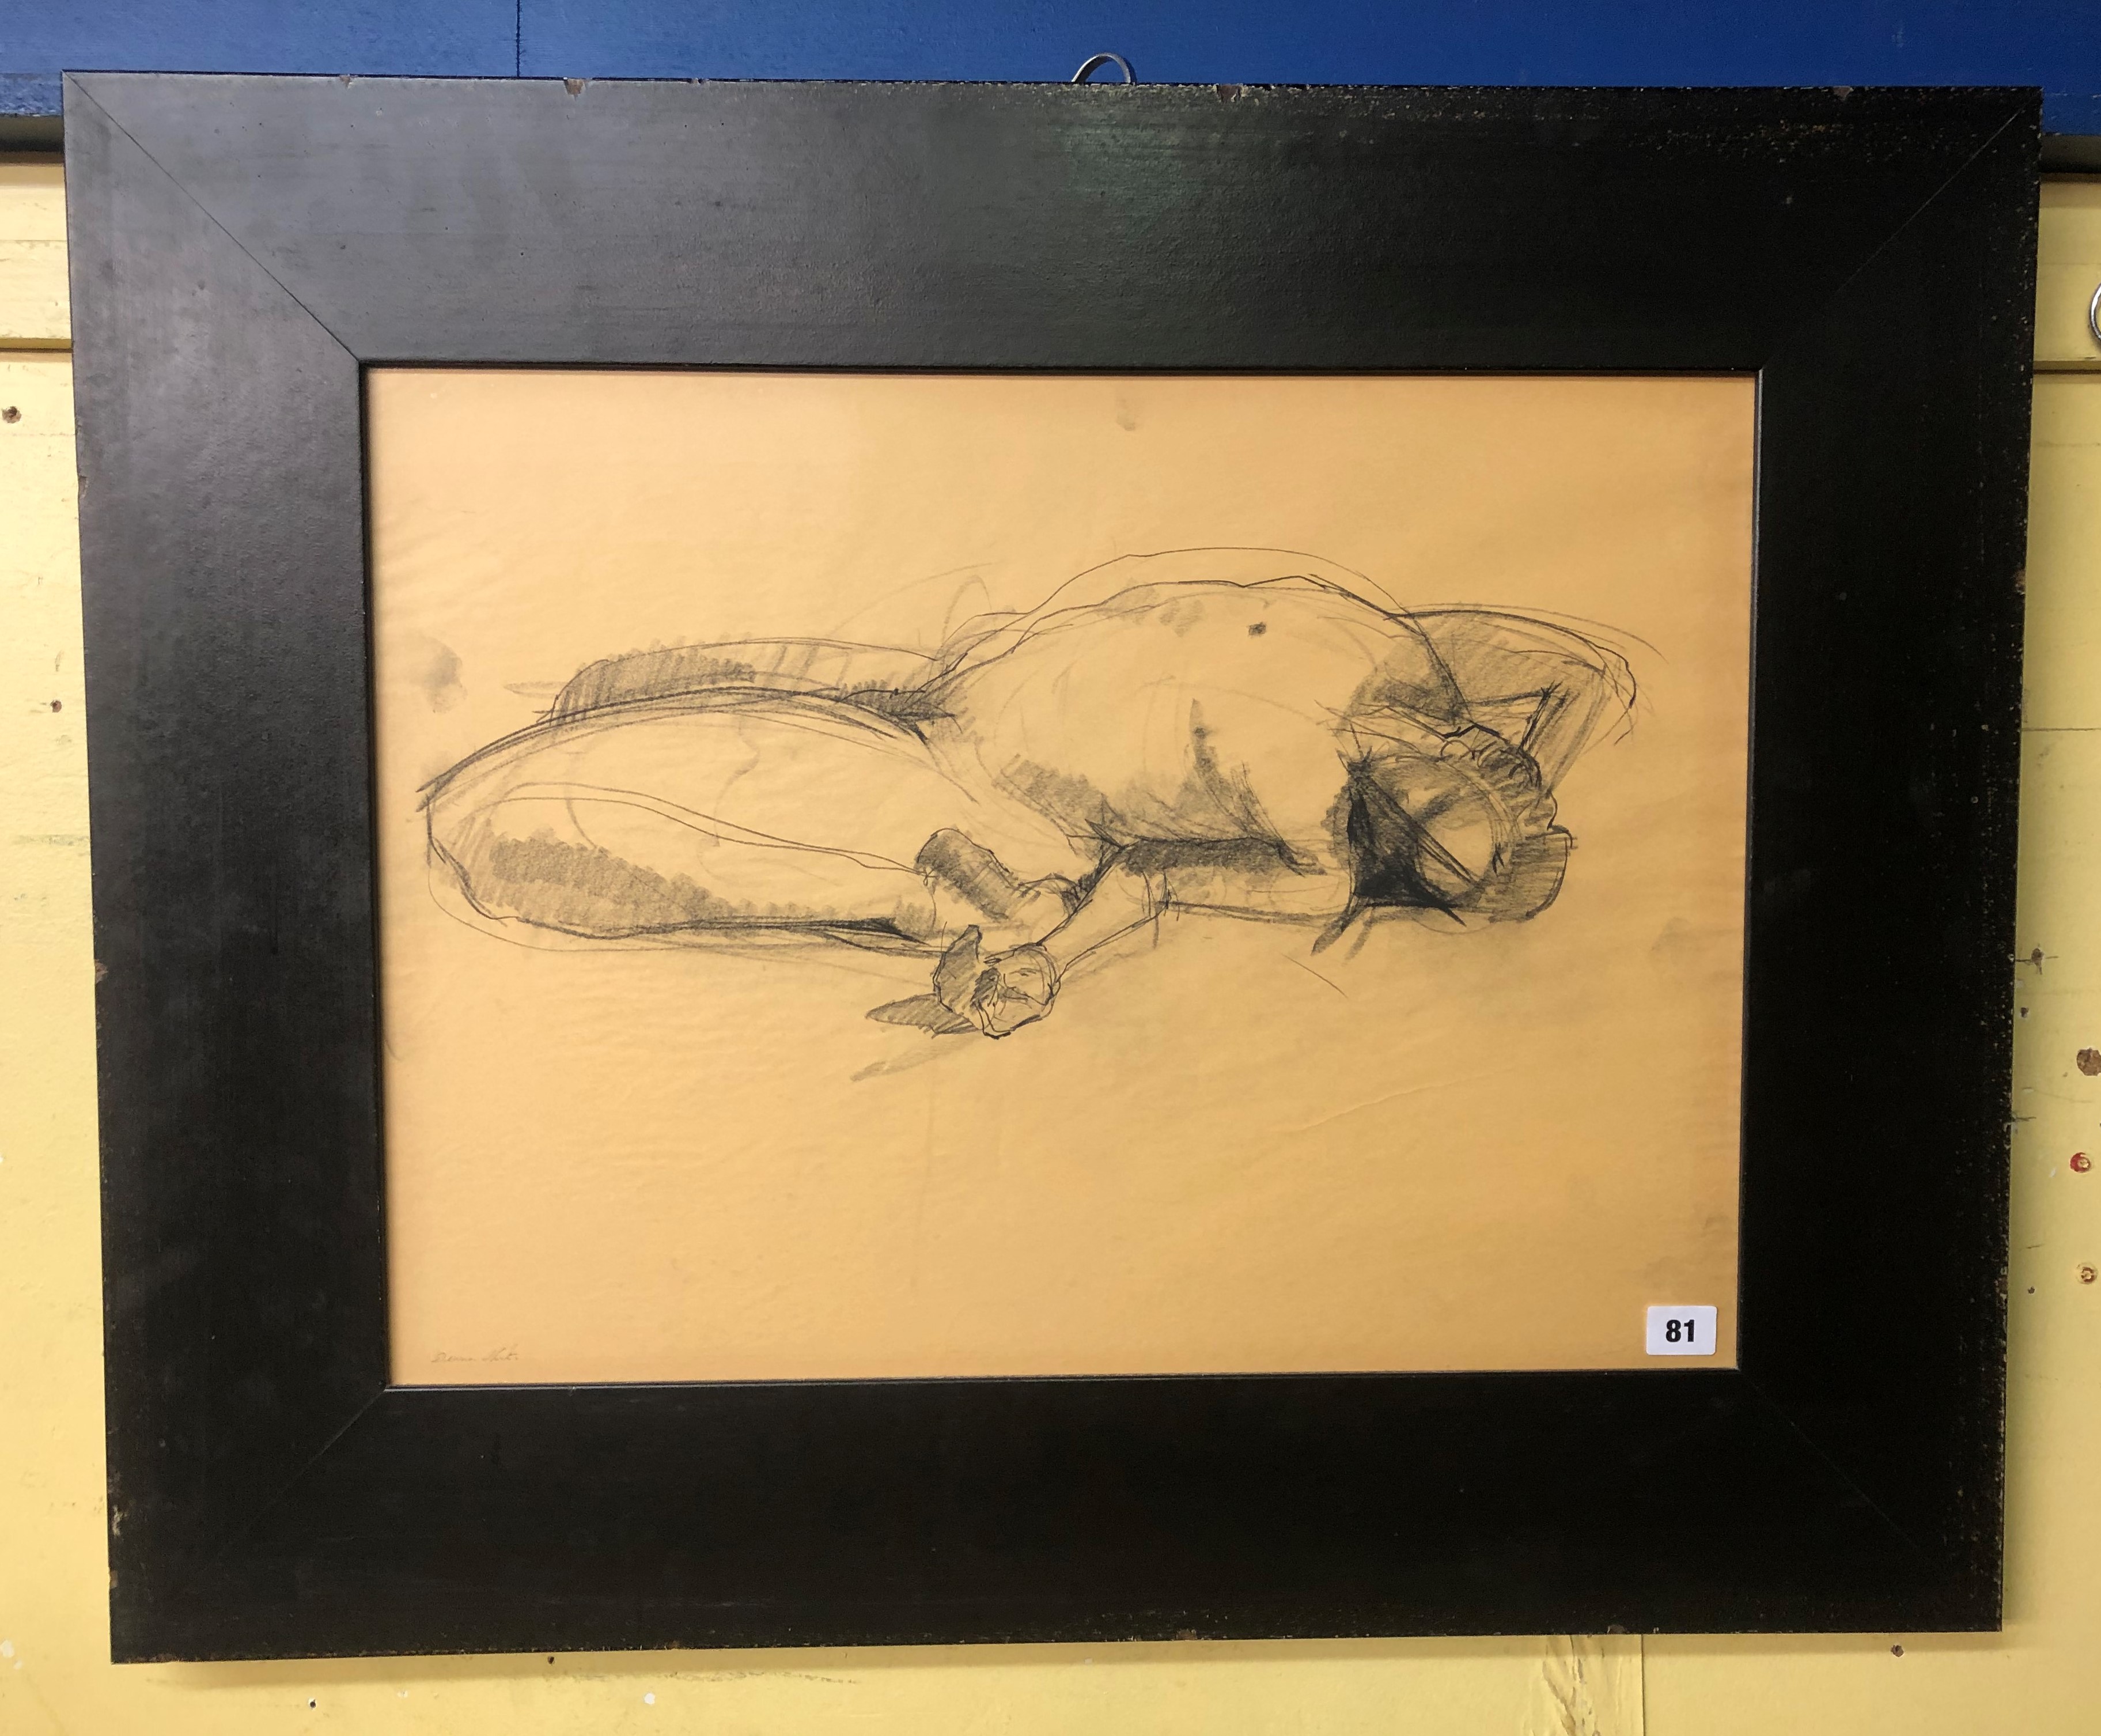 SIGNED PENCIL AND CHARCOAL DRAWING OF A "MALE NUDE FIGURE" BY DEANA NASTIC 59CM X 44CM